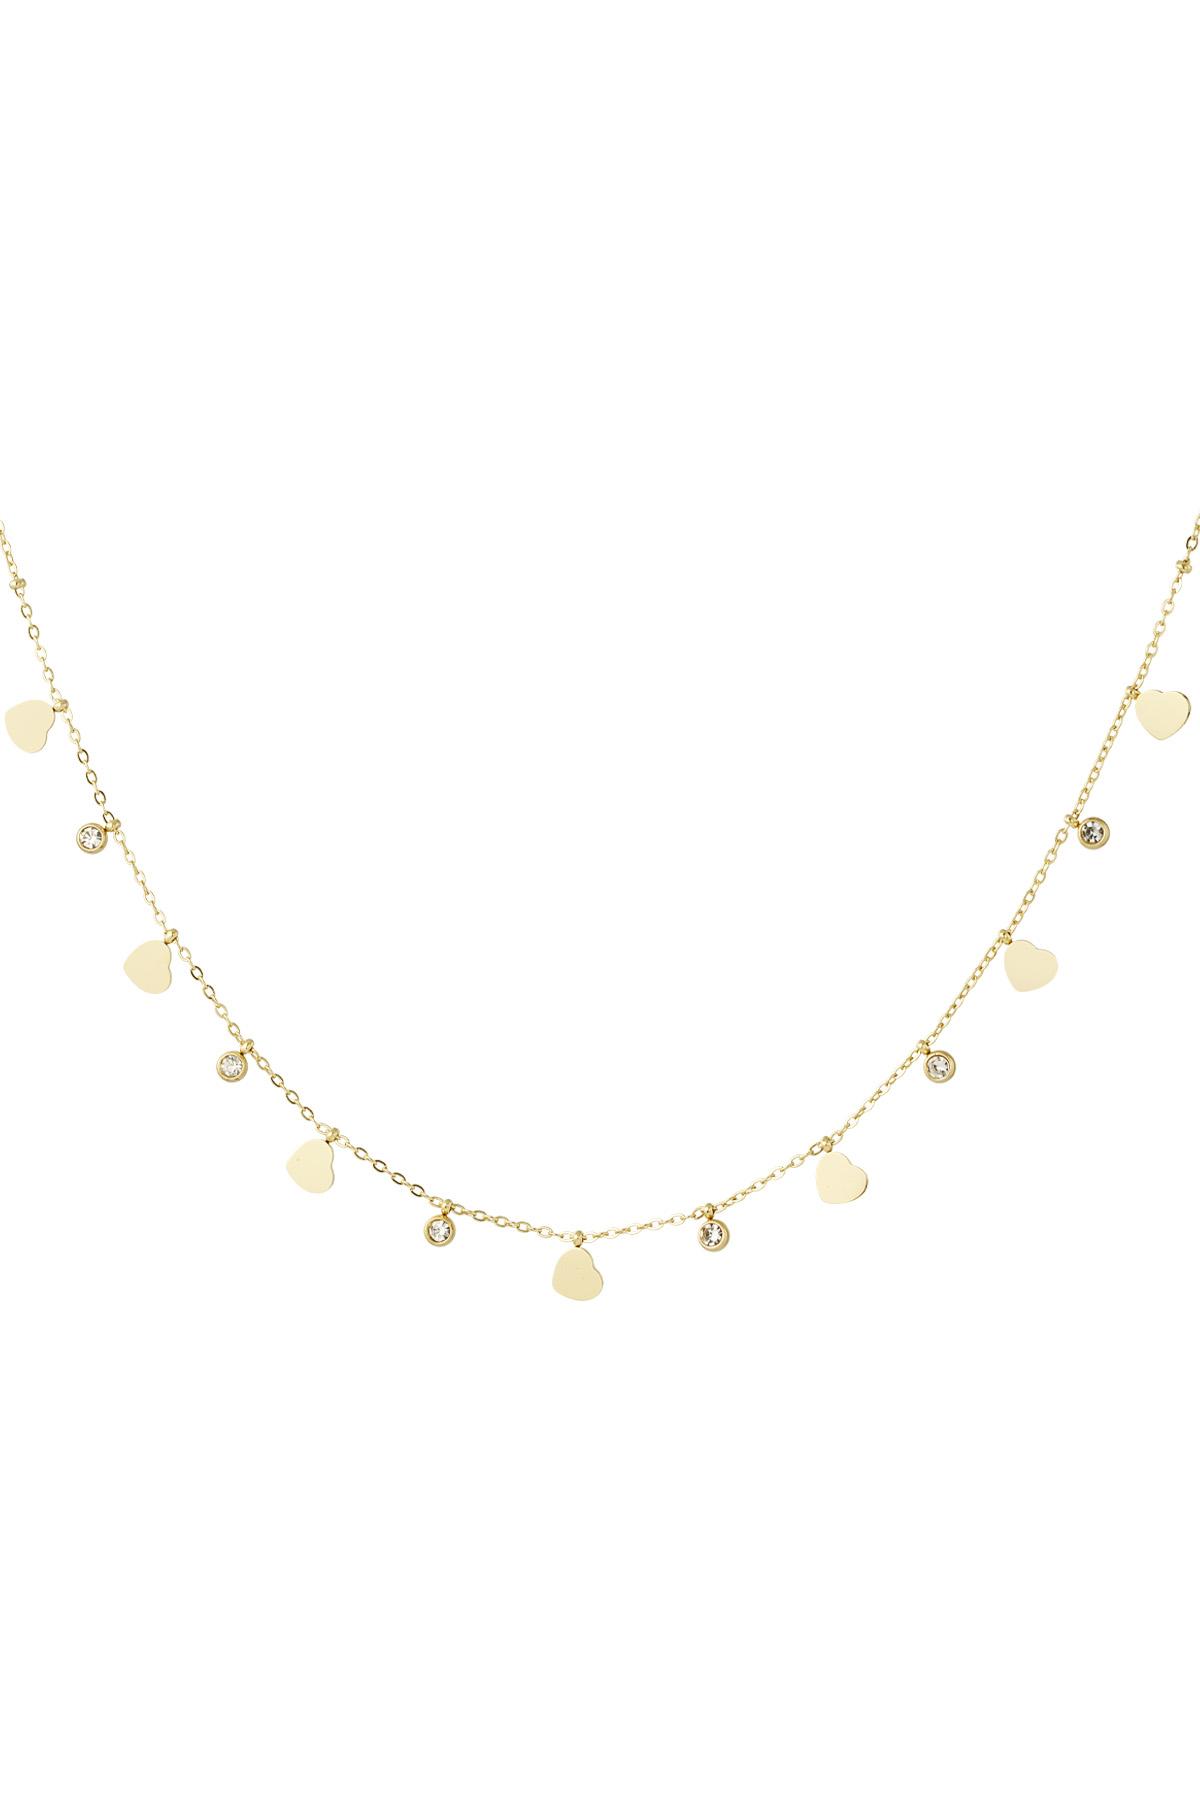 Charm necklace with hearts and diamonds - gold 